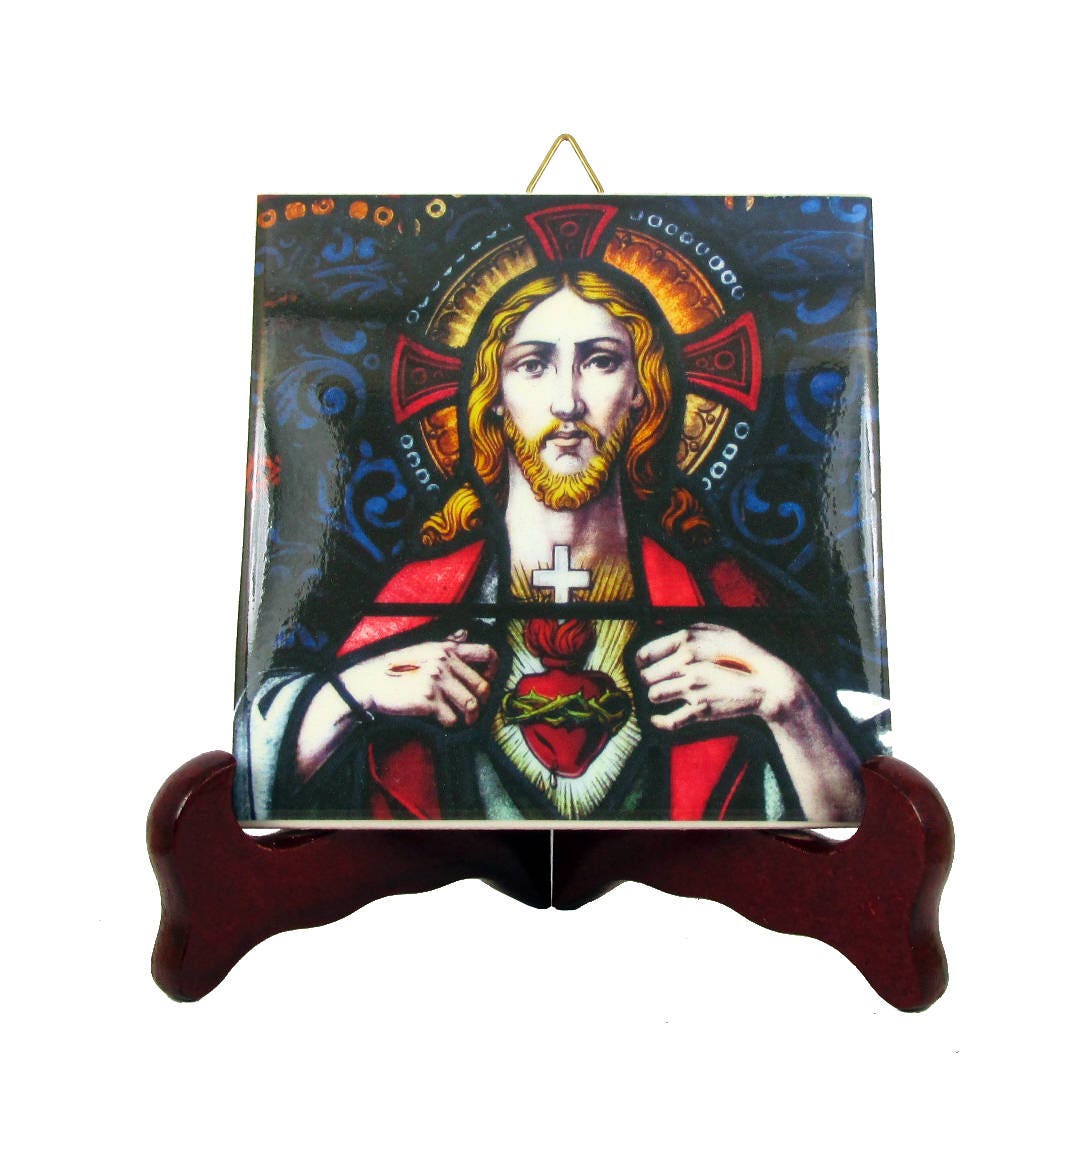 The Sacred Heart Of Jesus Devotional Icon On Tile - Religious Gift Idea Handmade in Italy Catholic Art Christ Wall Hanging